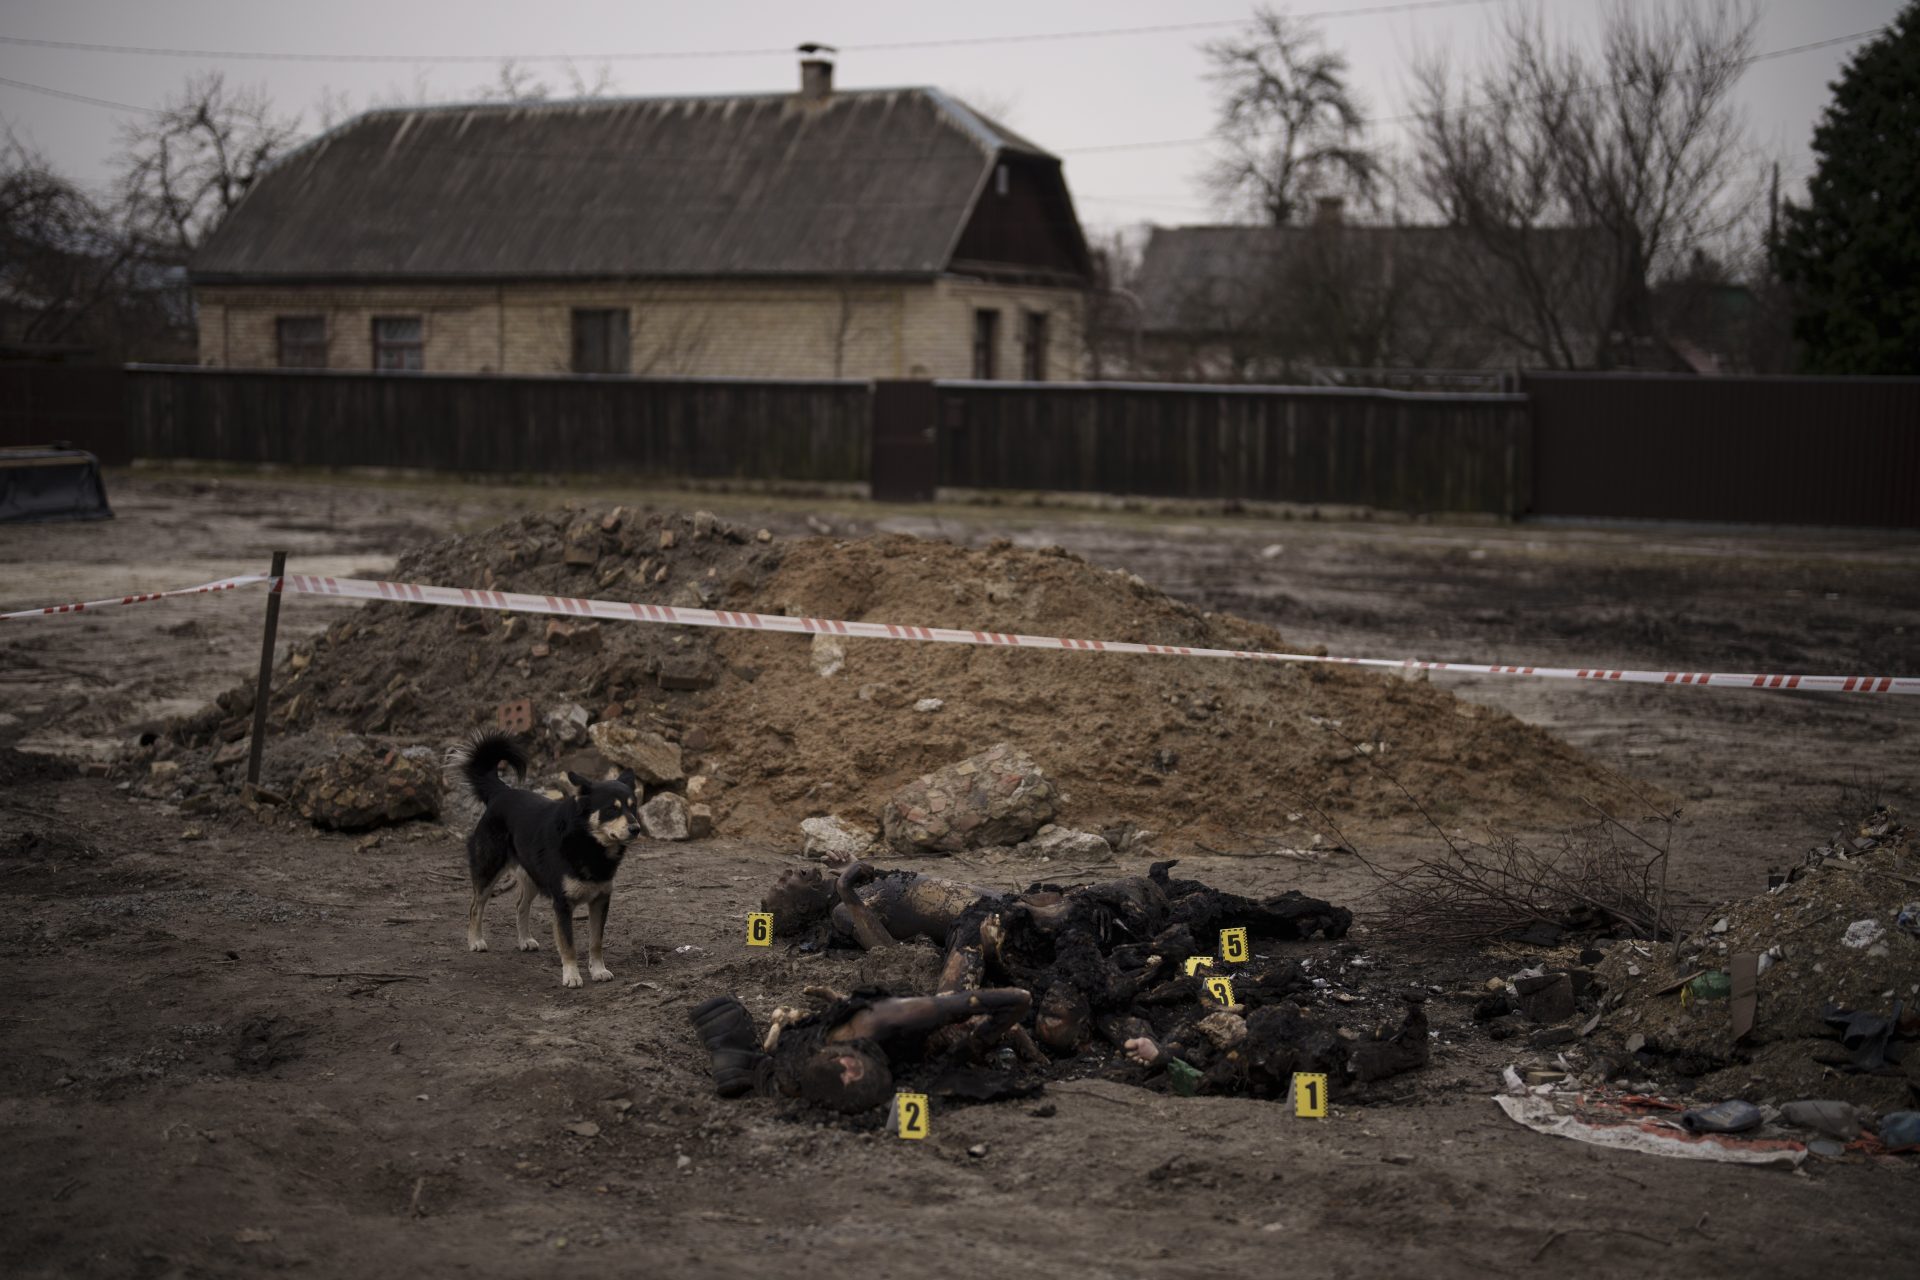 A dog stands next to six unidentified charred bodies lying on the ground at a residential area in Bucha, on the outskirts of Kyiv, Ukraine, Tuesday, April 5, 2022.